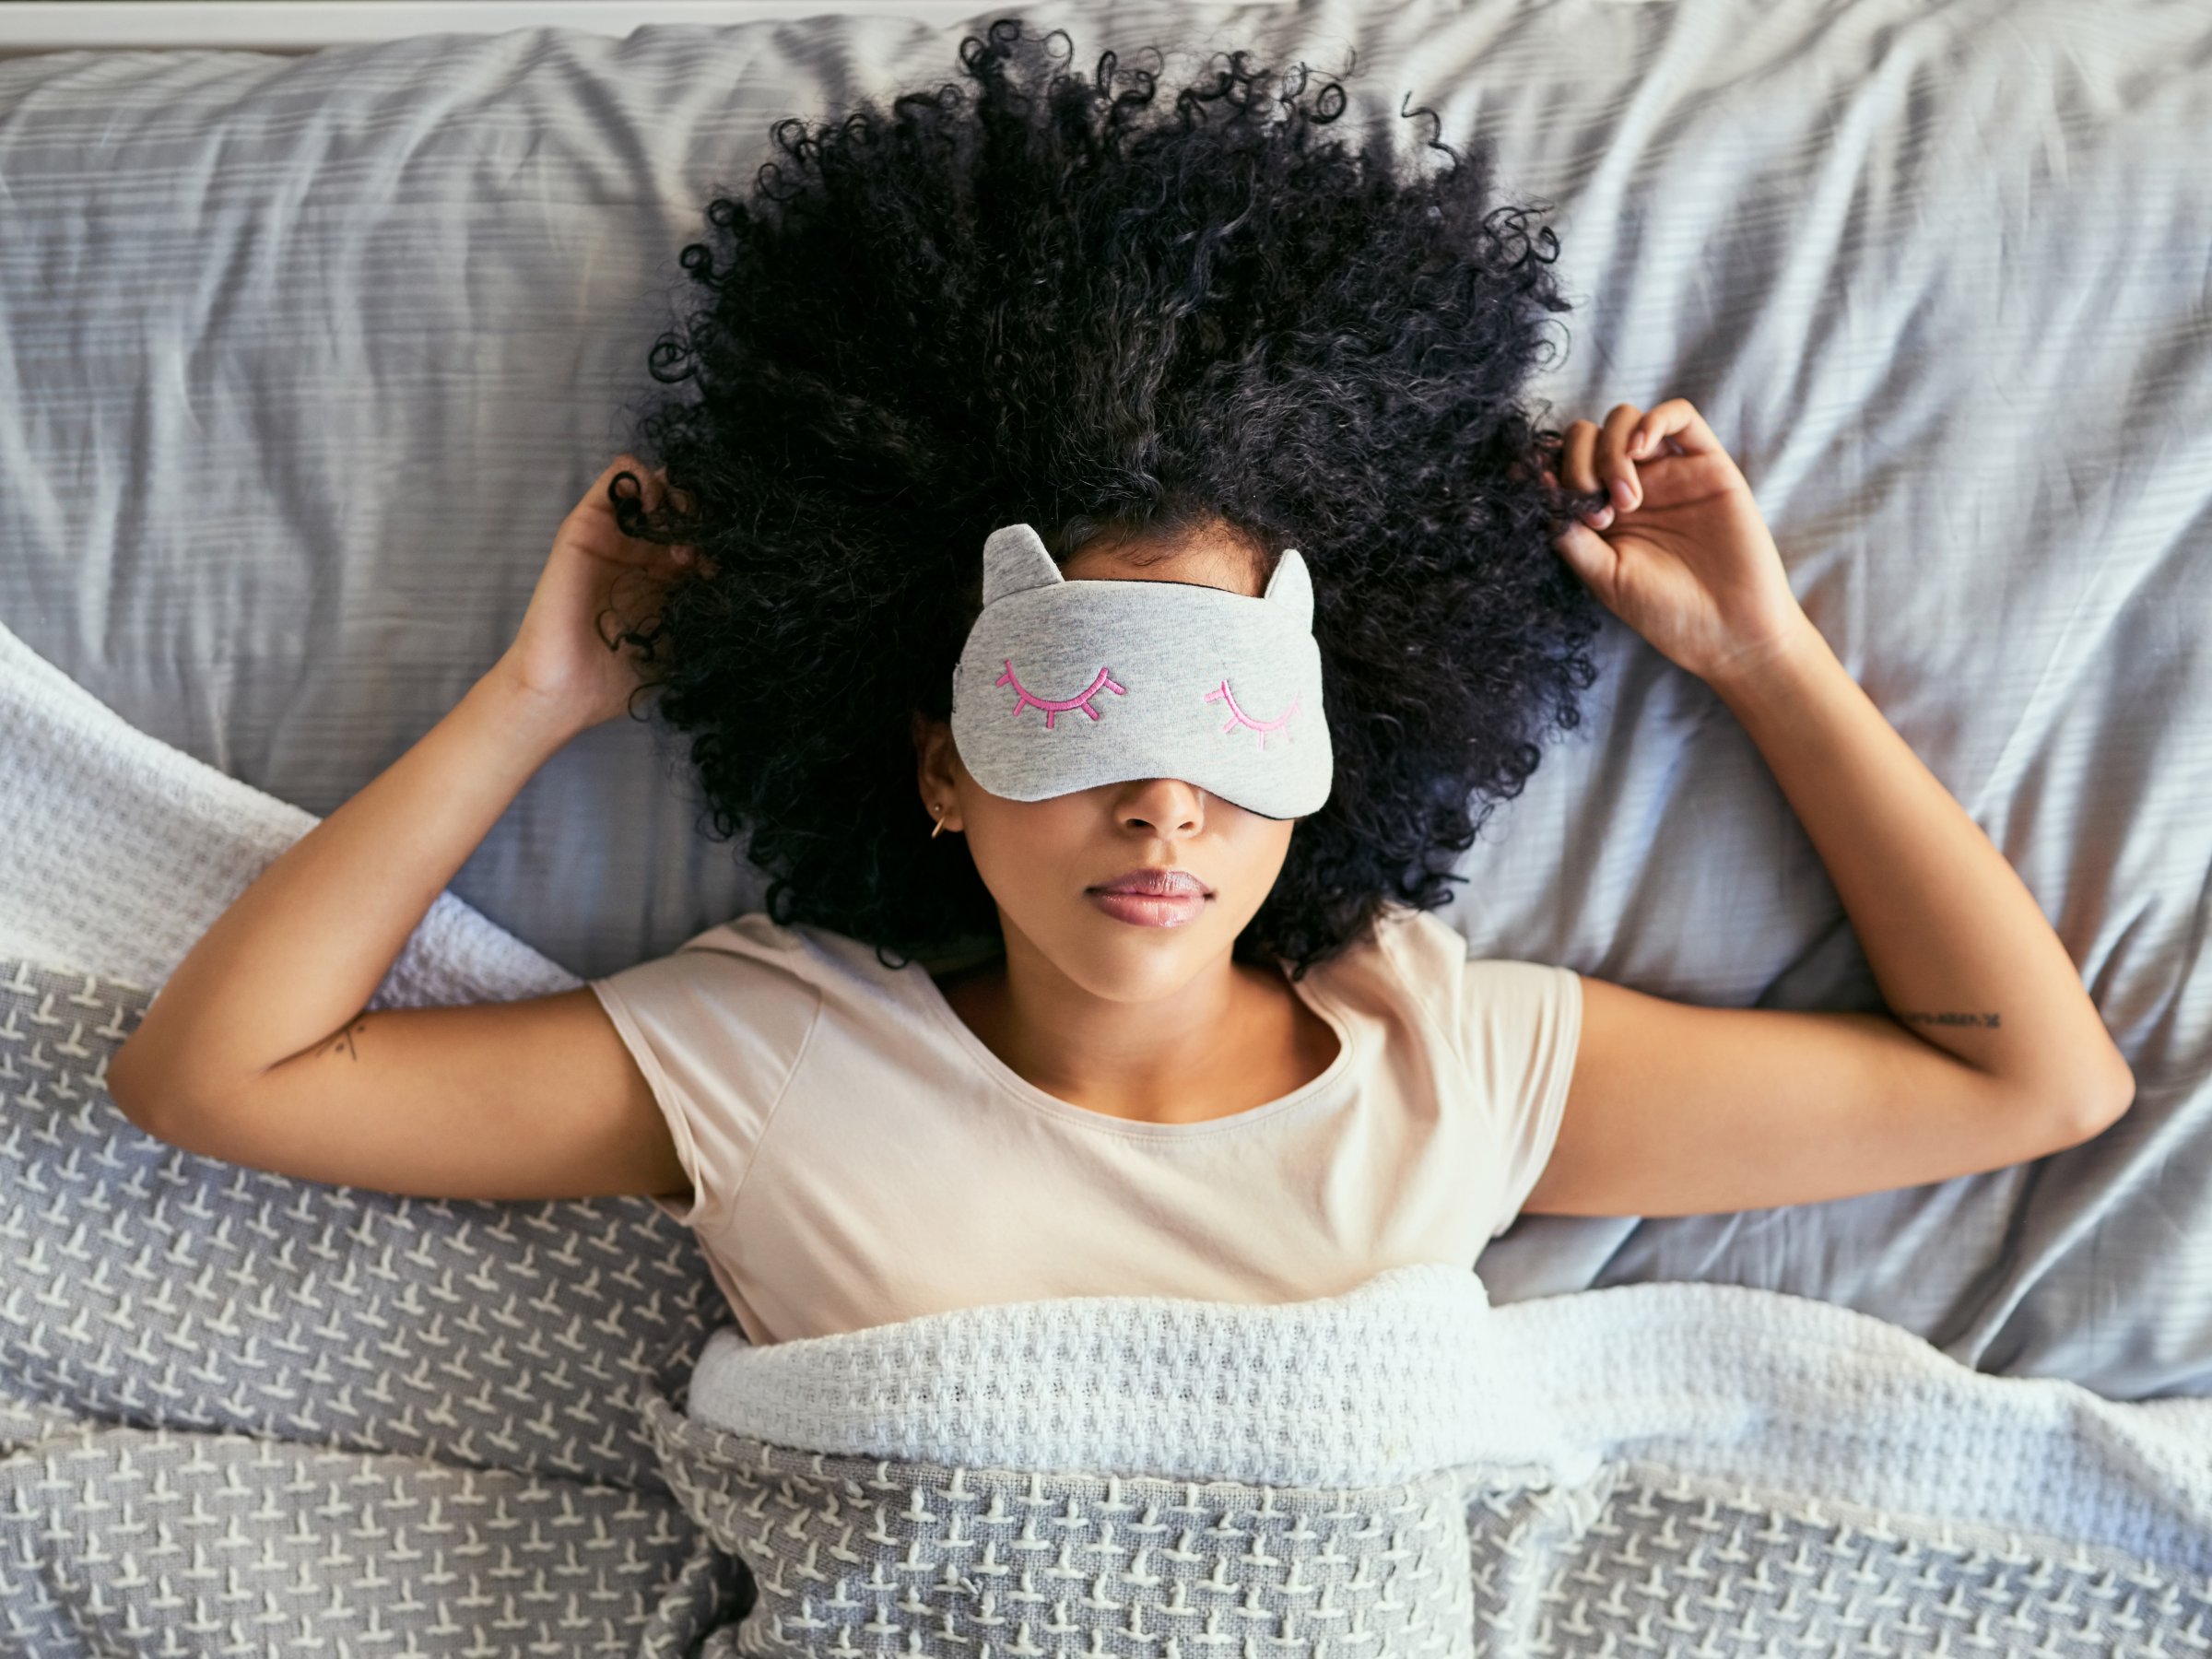 One way to have a better sleep is by staying caffeine free [Layla Bird Getty Images]